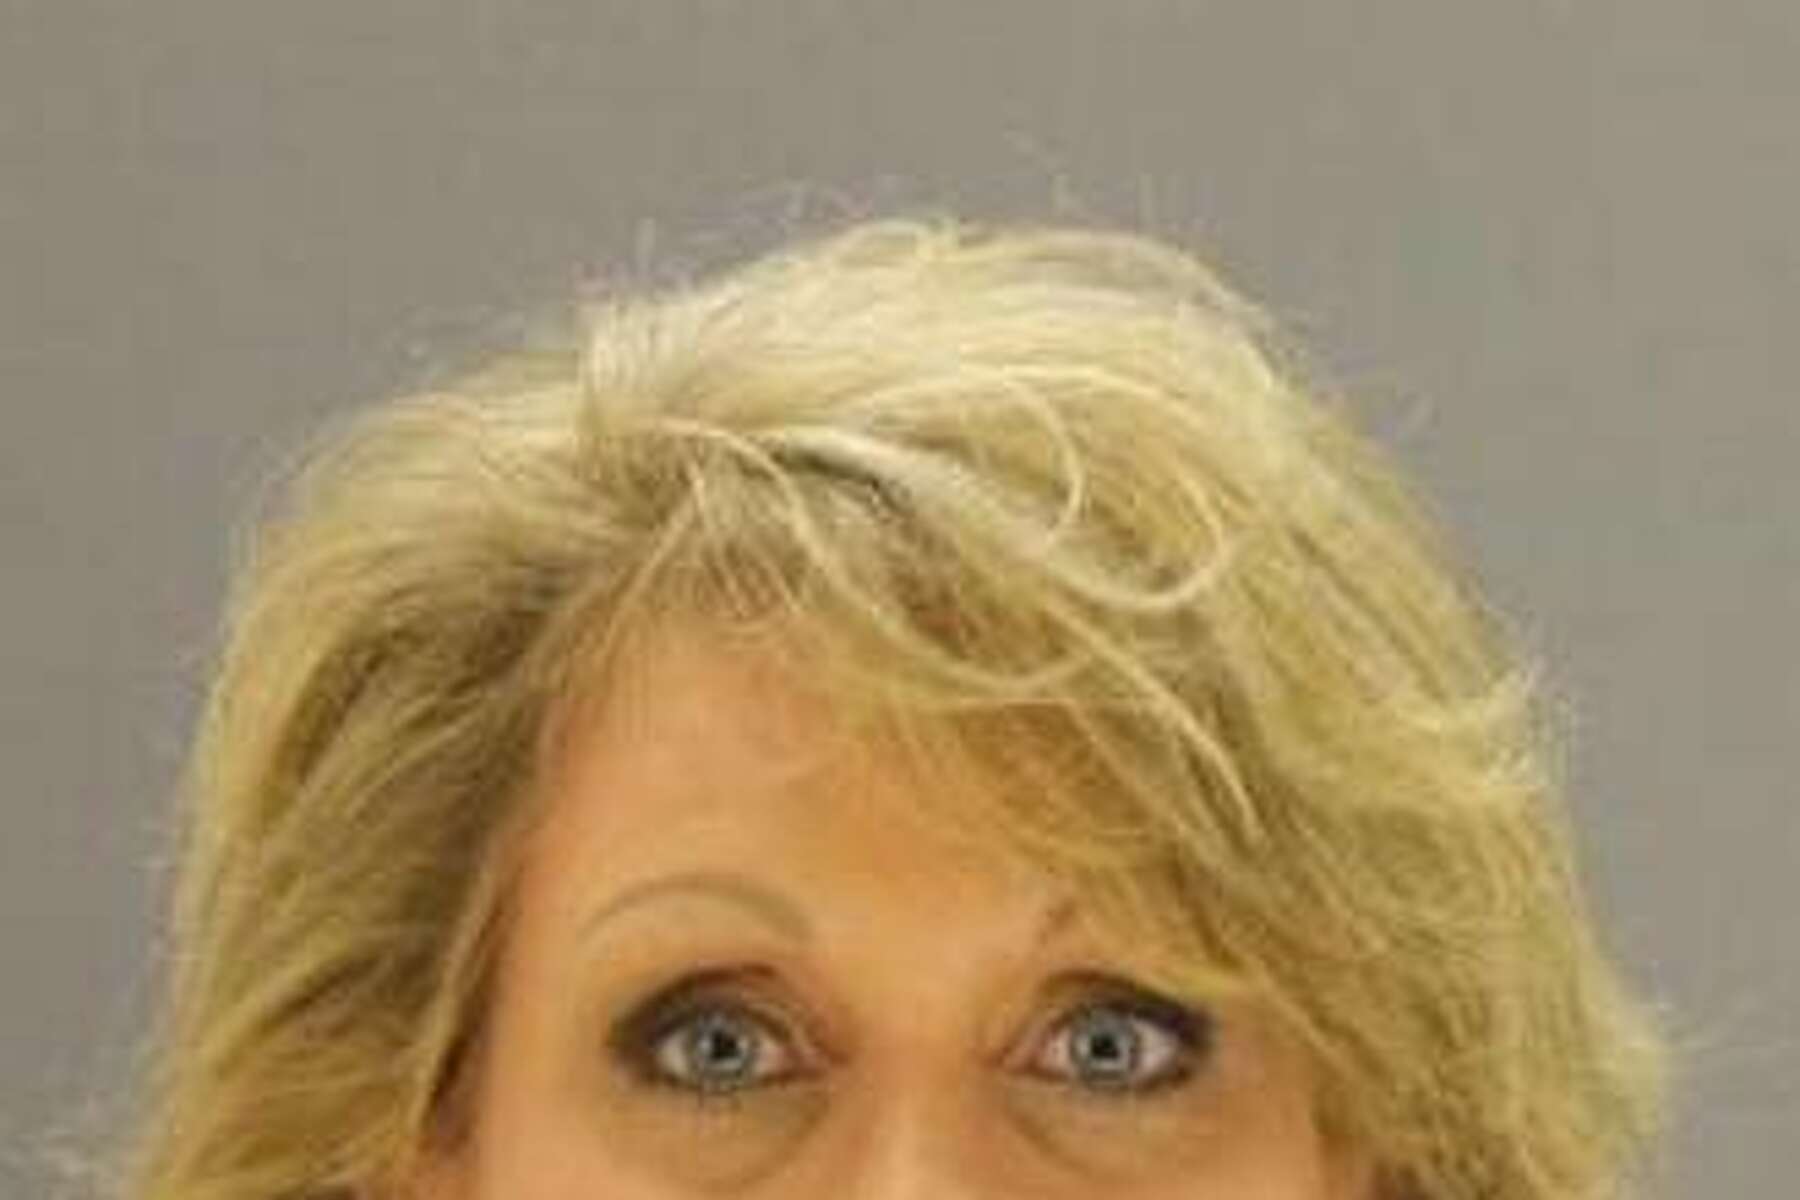 Dallas teacher and student had sex in the classroom, charges claim